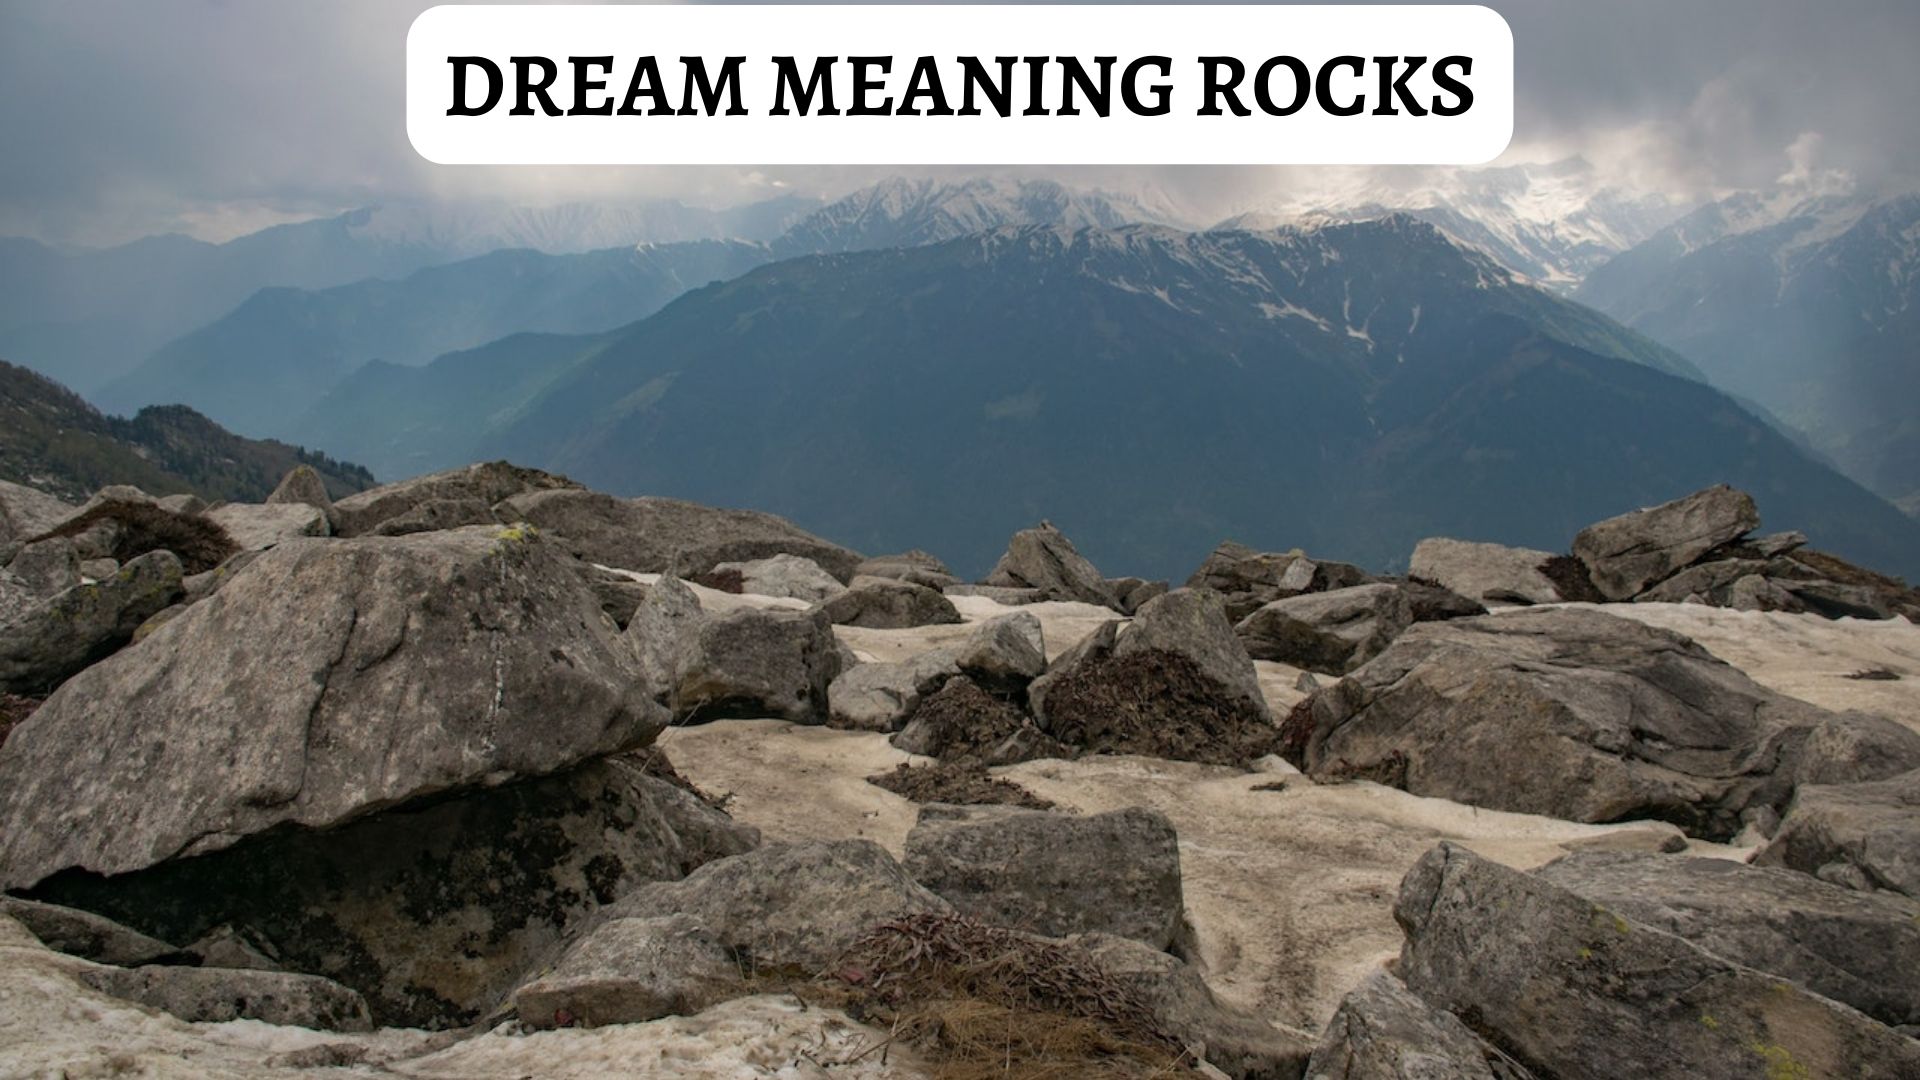 Dream Meaning Rocks - A Symbol Of Power And Achievement